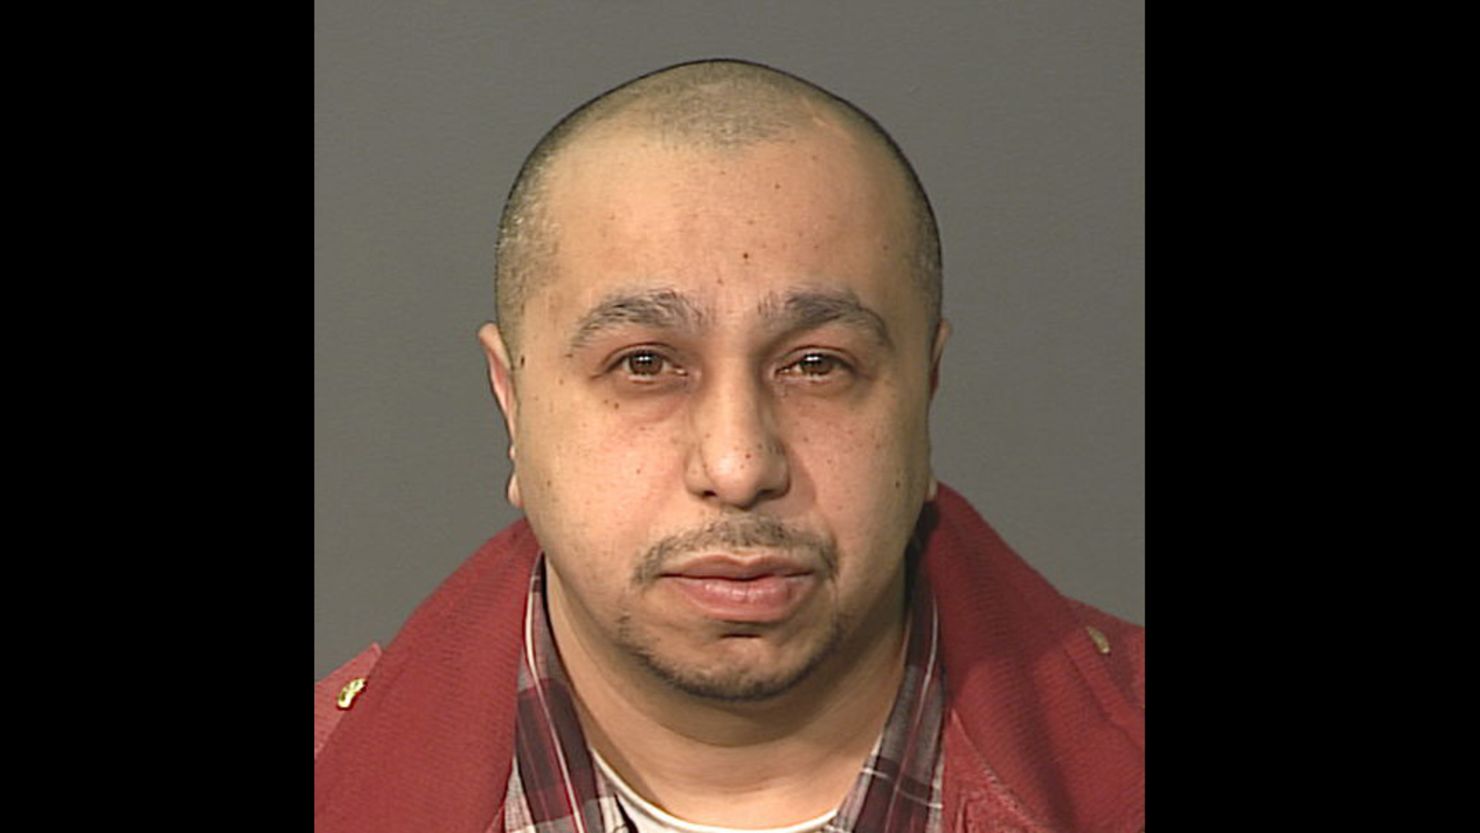 Julio Acevedo, 44, is charged with second-degree vehicular manslaughter after he hit a livery cab carrying a young couple. 